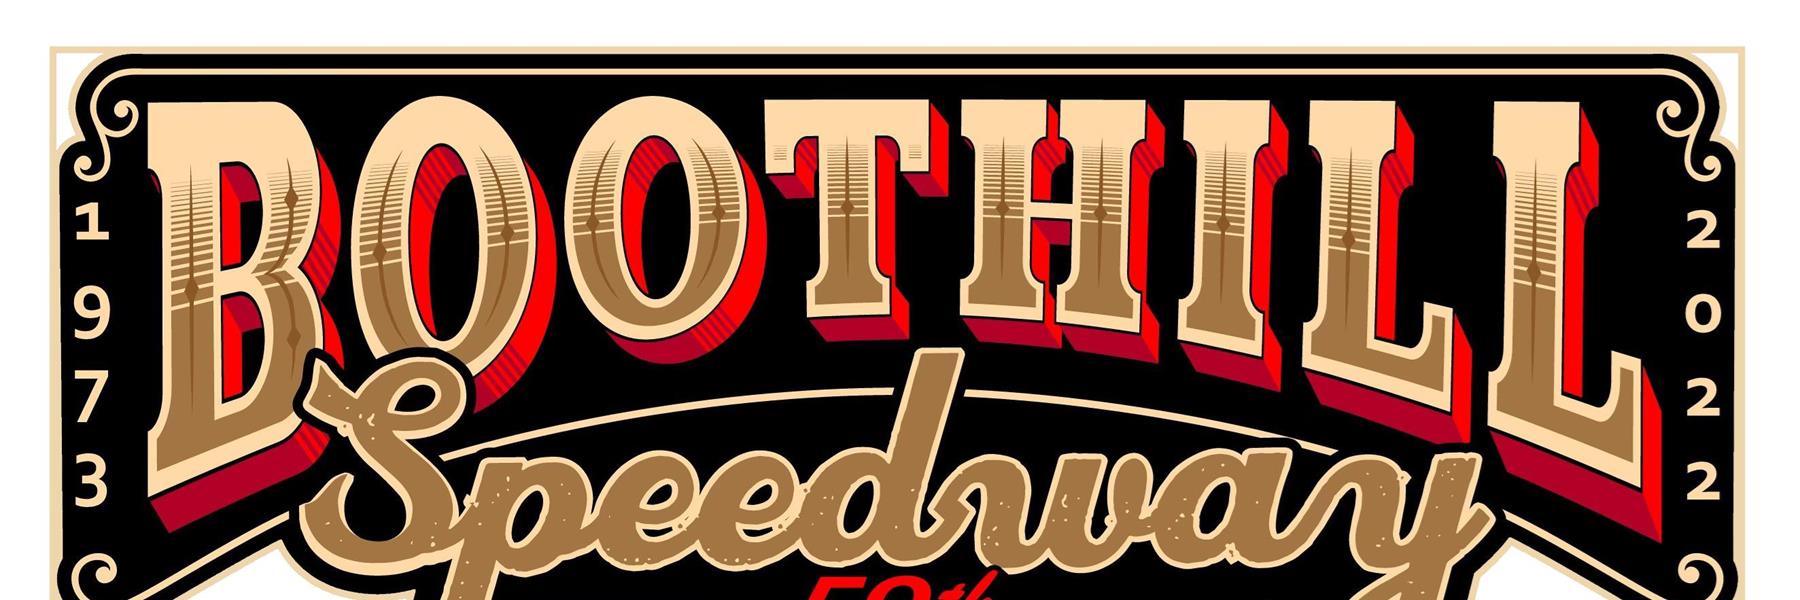 3/5/2022 - Boothill Speedway